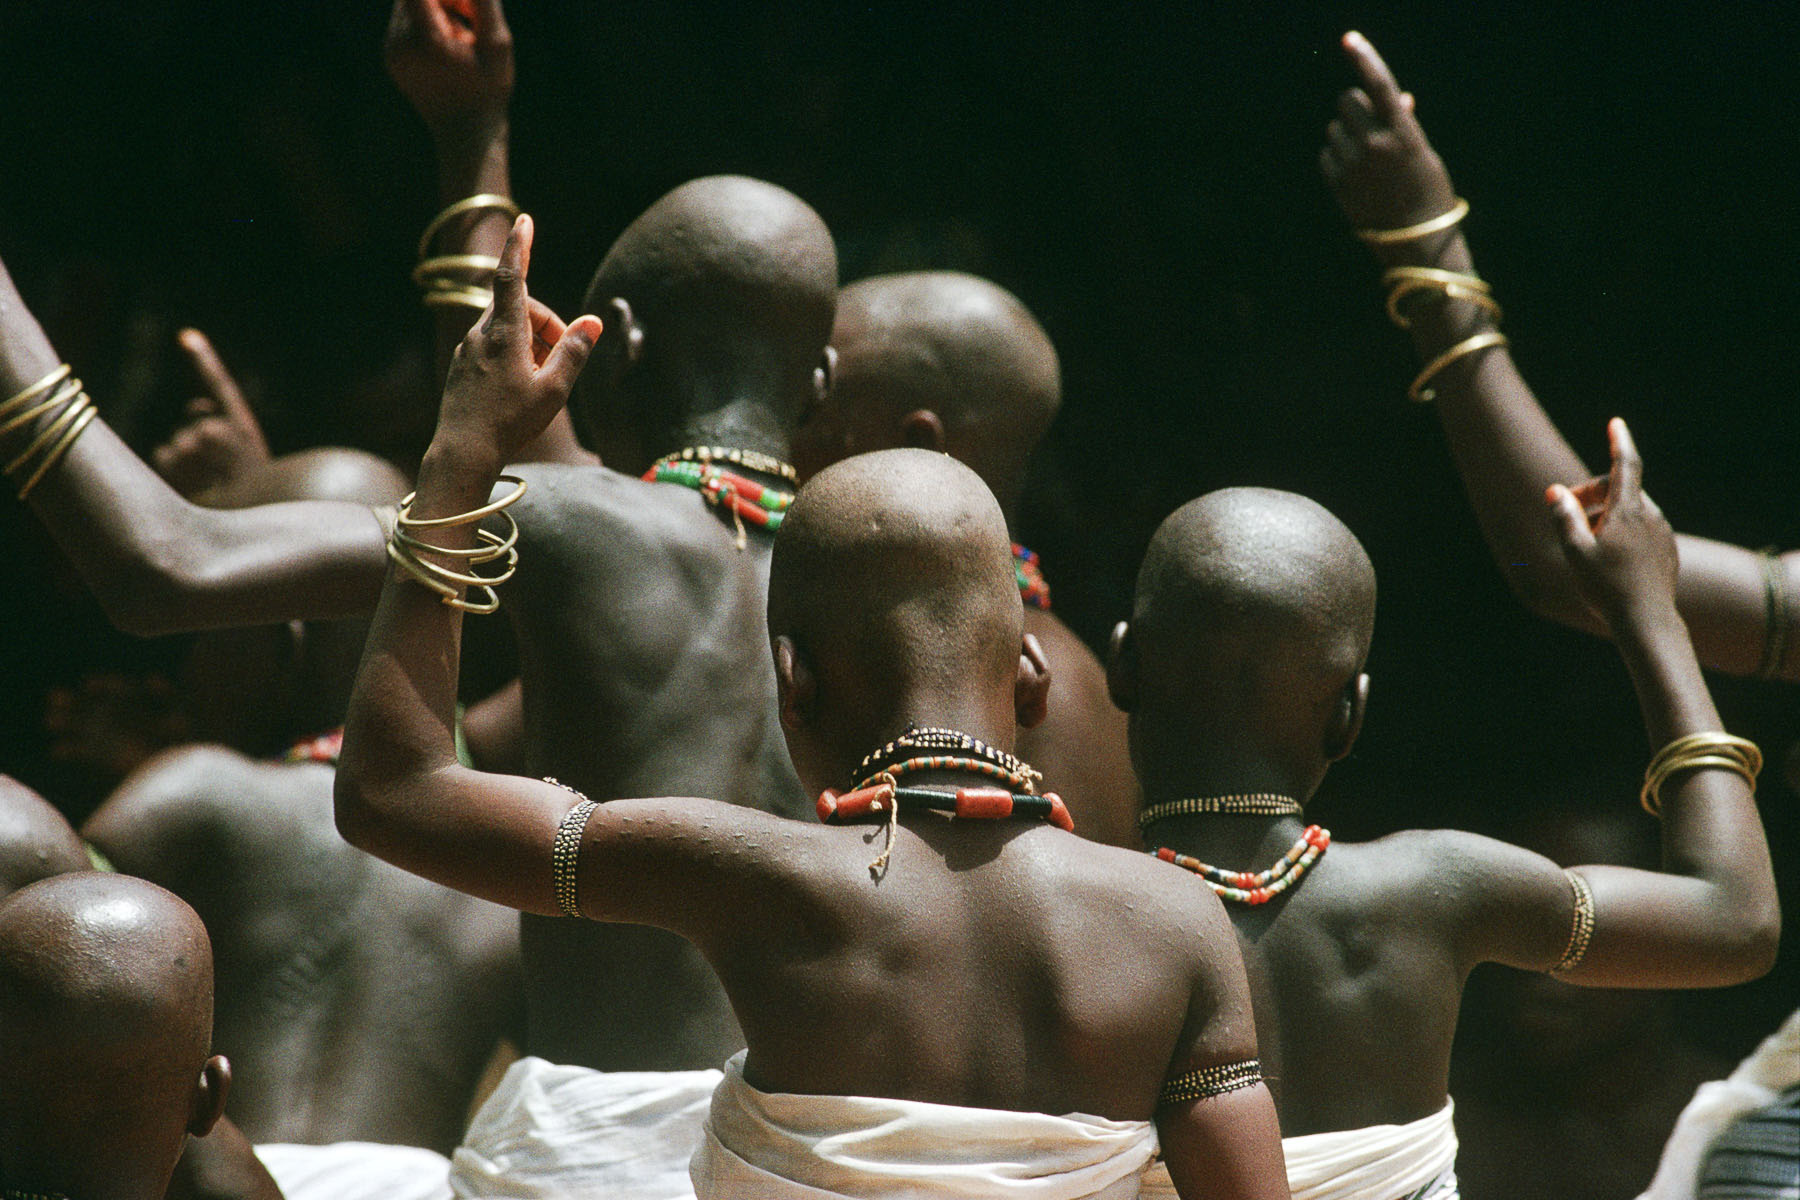 Ceremony ending initiation to the god Loko in March 1998